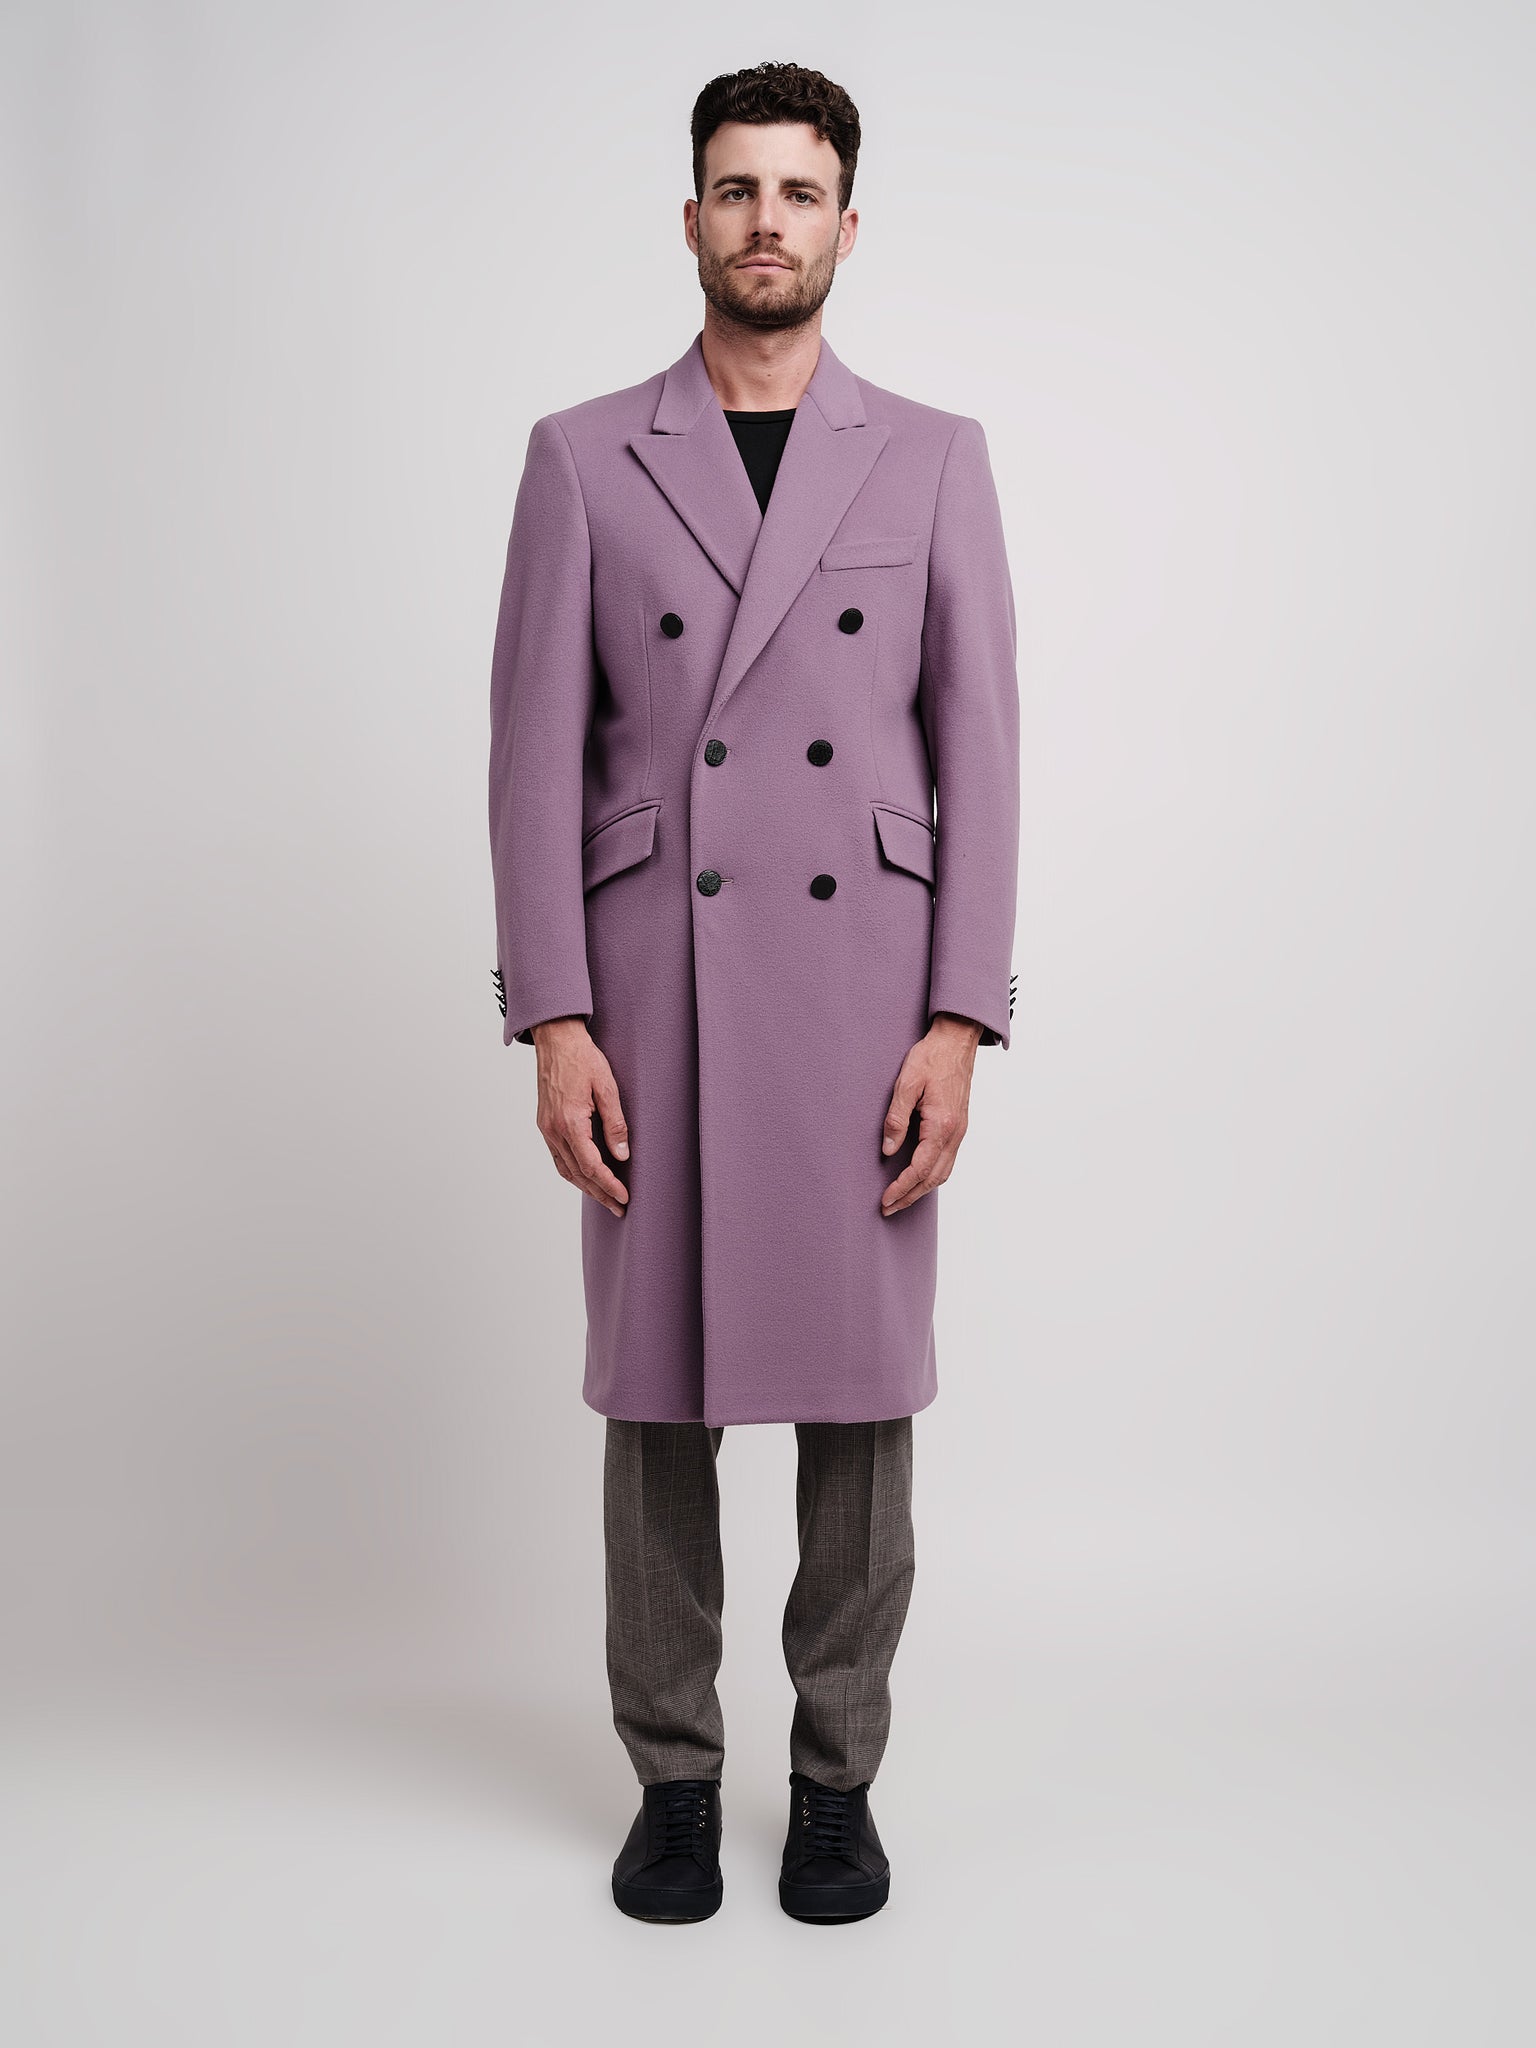 Double-breasted coat with straight shoulder in mauve wool cloth